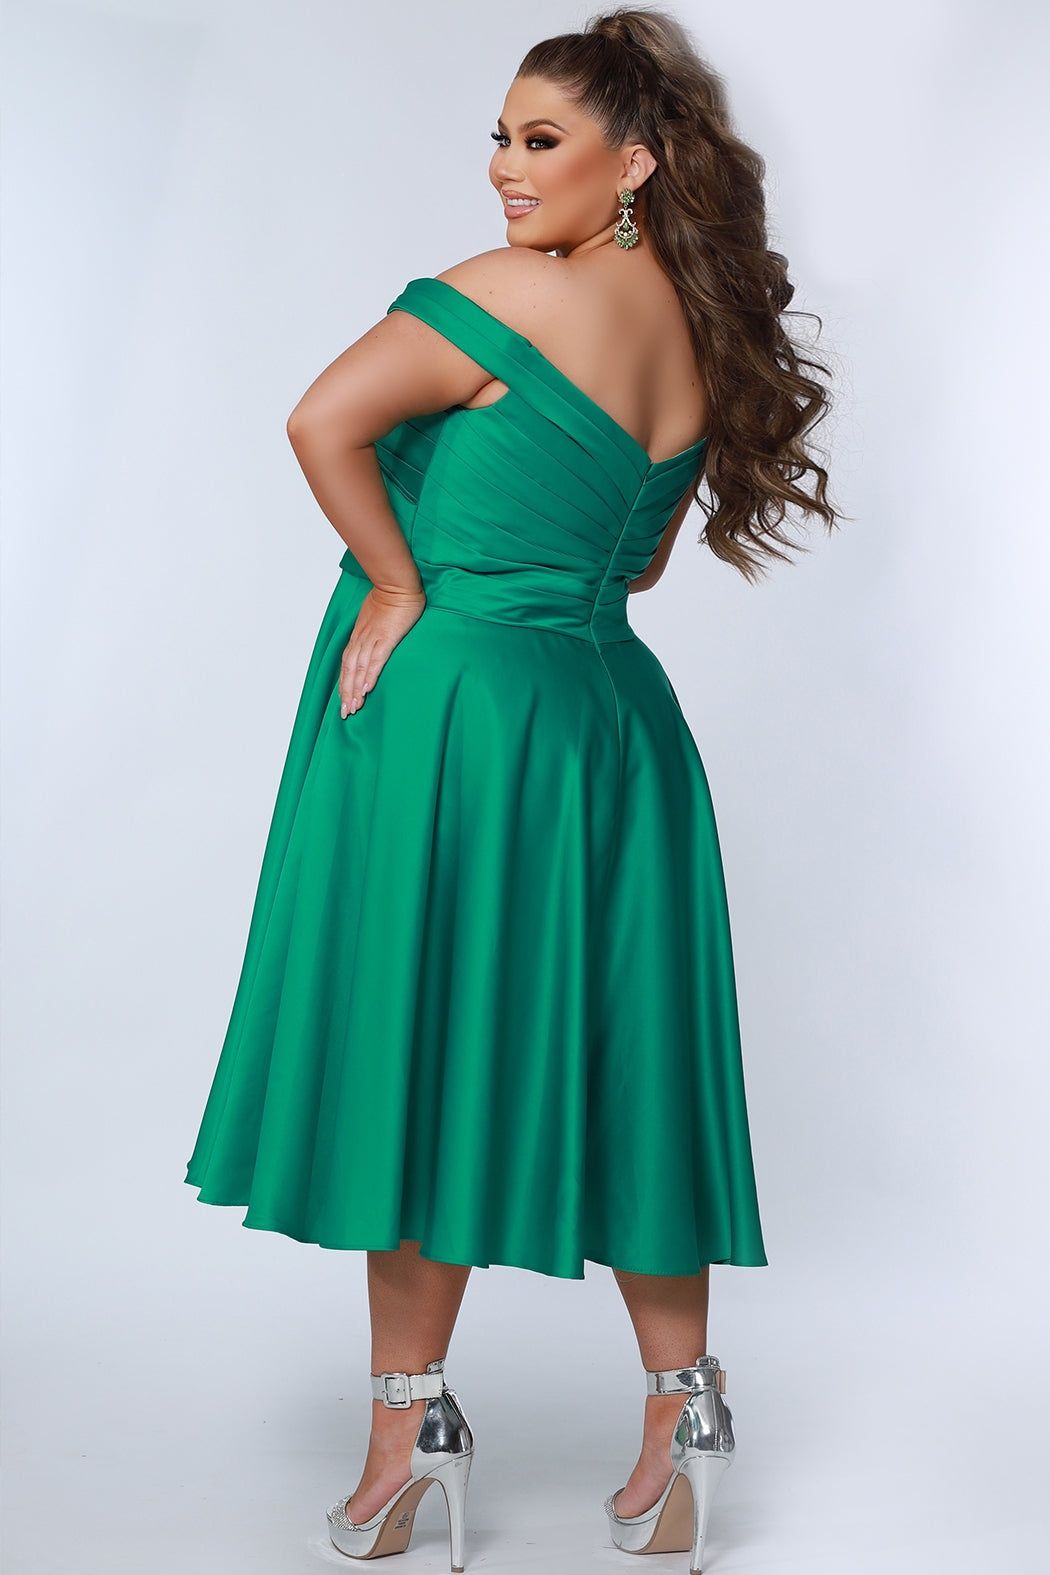 Style CE2301 Sydney's Closet Plus Size 30 Satin Emerald Black Cocktail Dress on Queenly